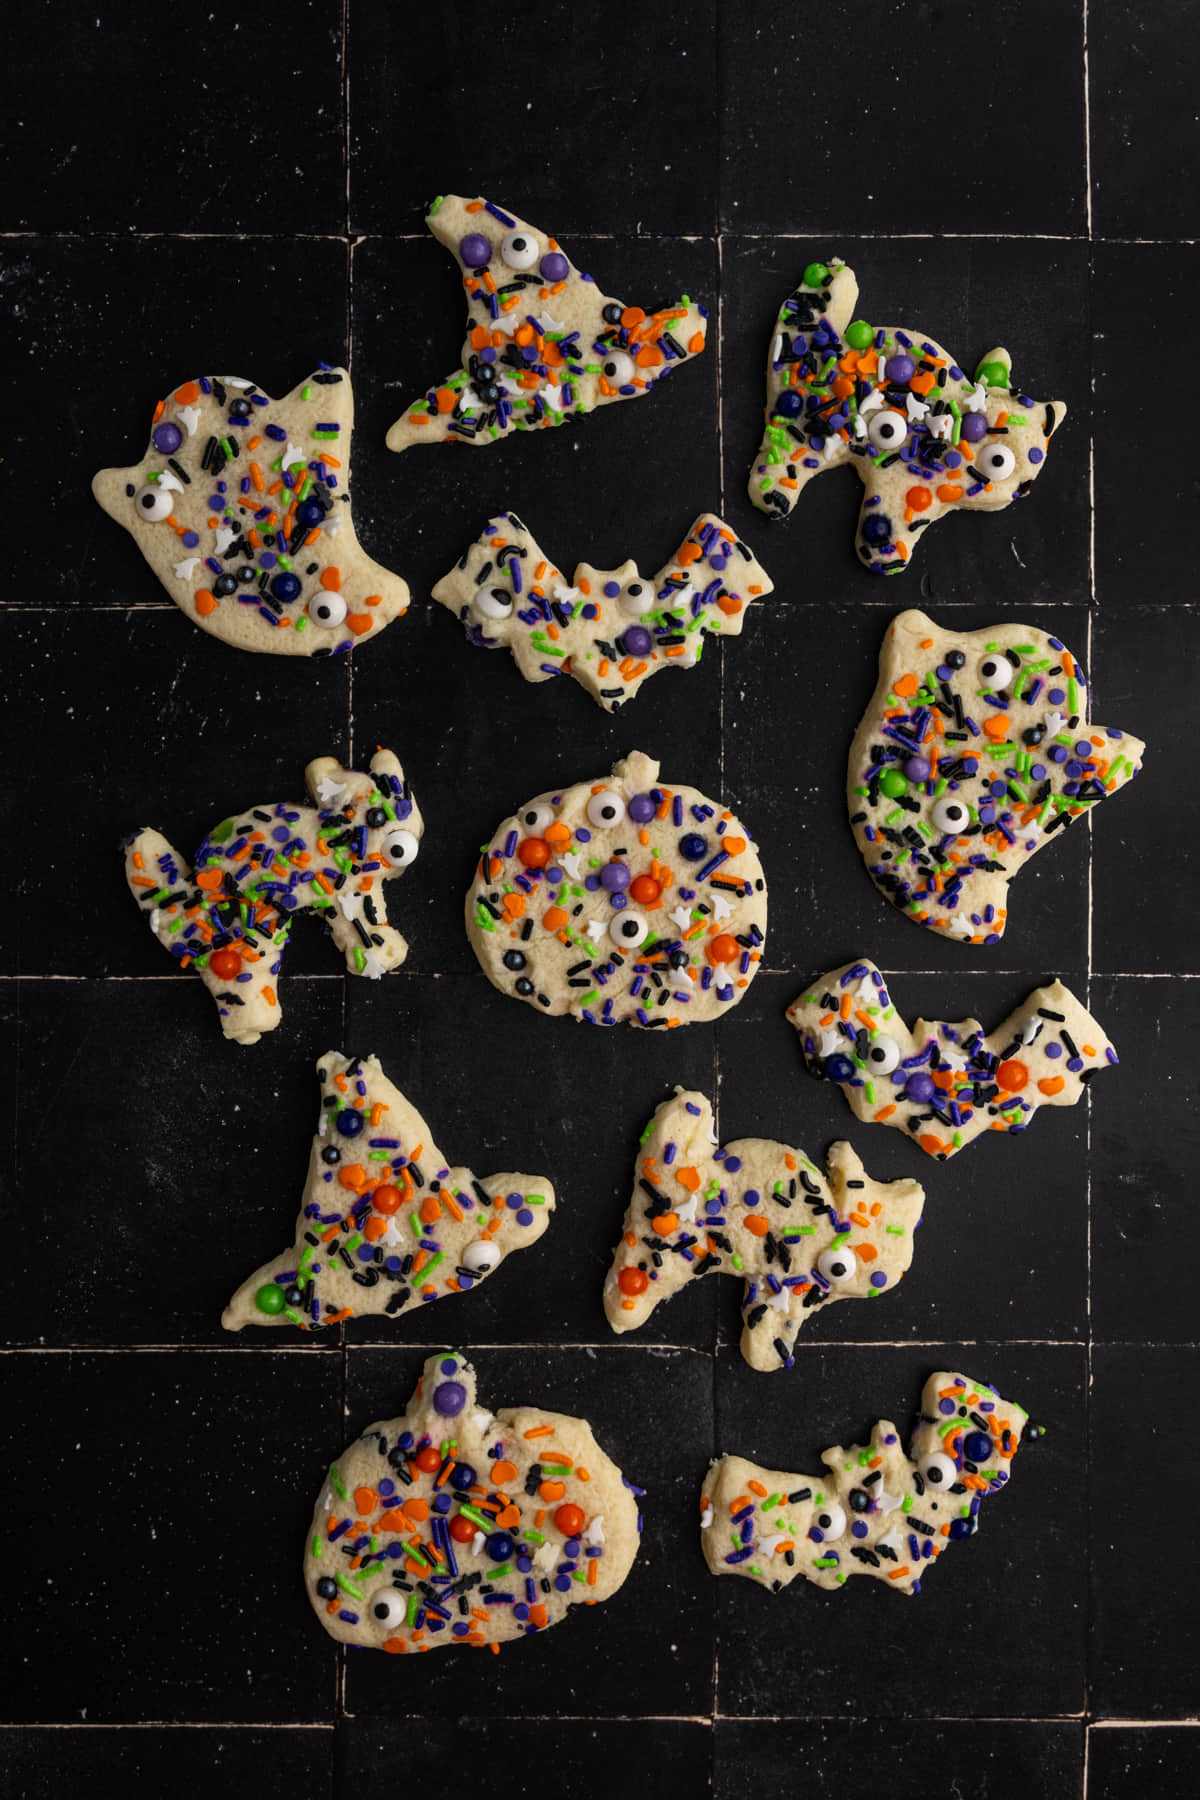 A variety of different Halloween shaped sugar cookies on a black surface.